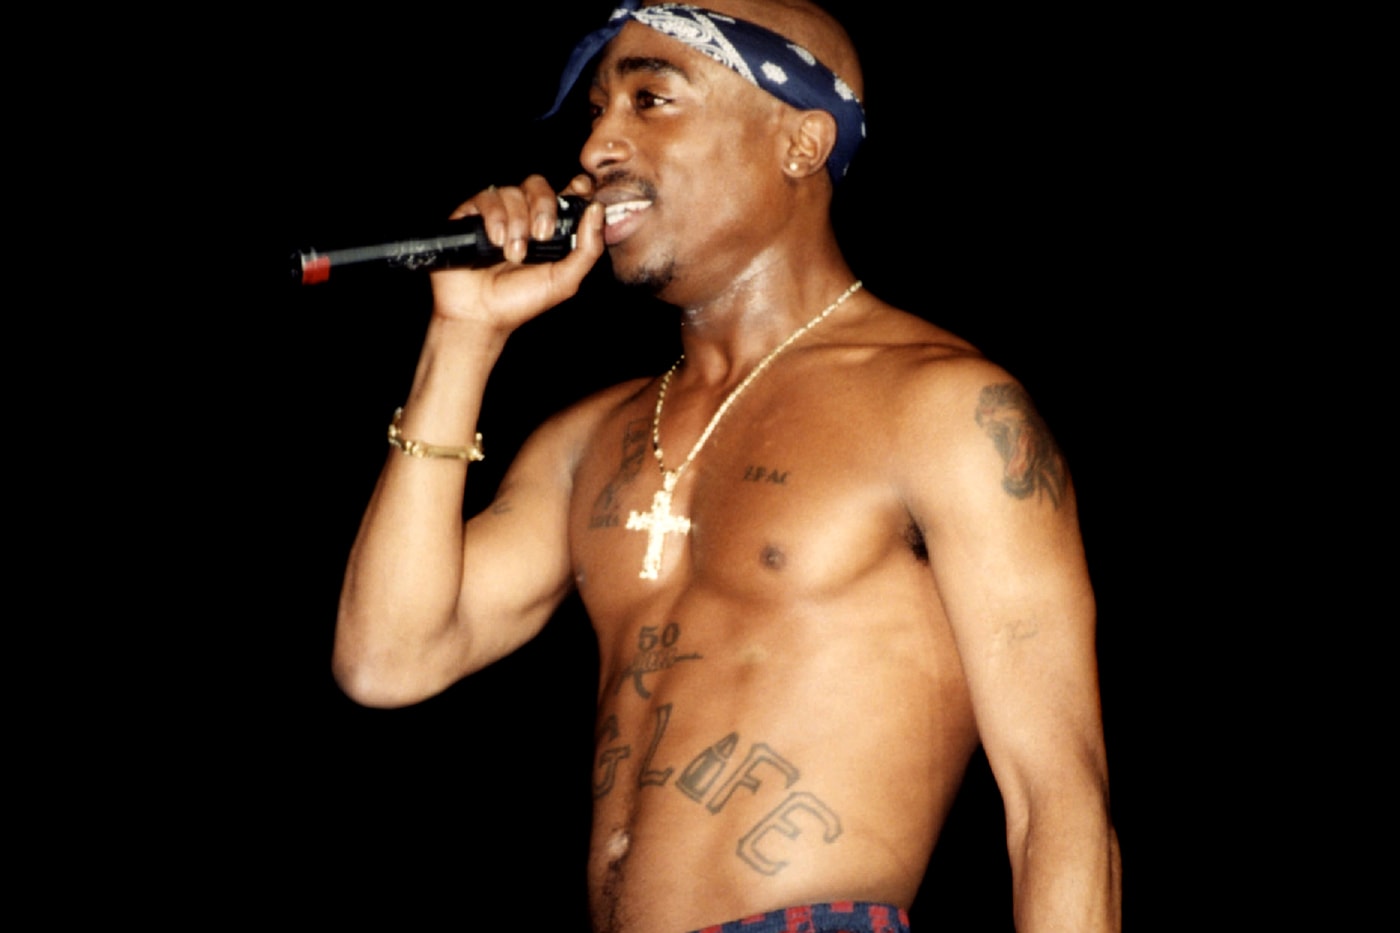 Tupac Sends Shots at Donald Trump and His "Greed" in Unreleased MTV Interview